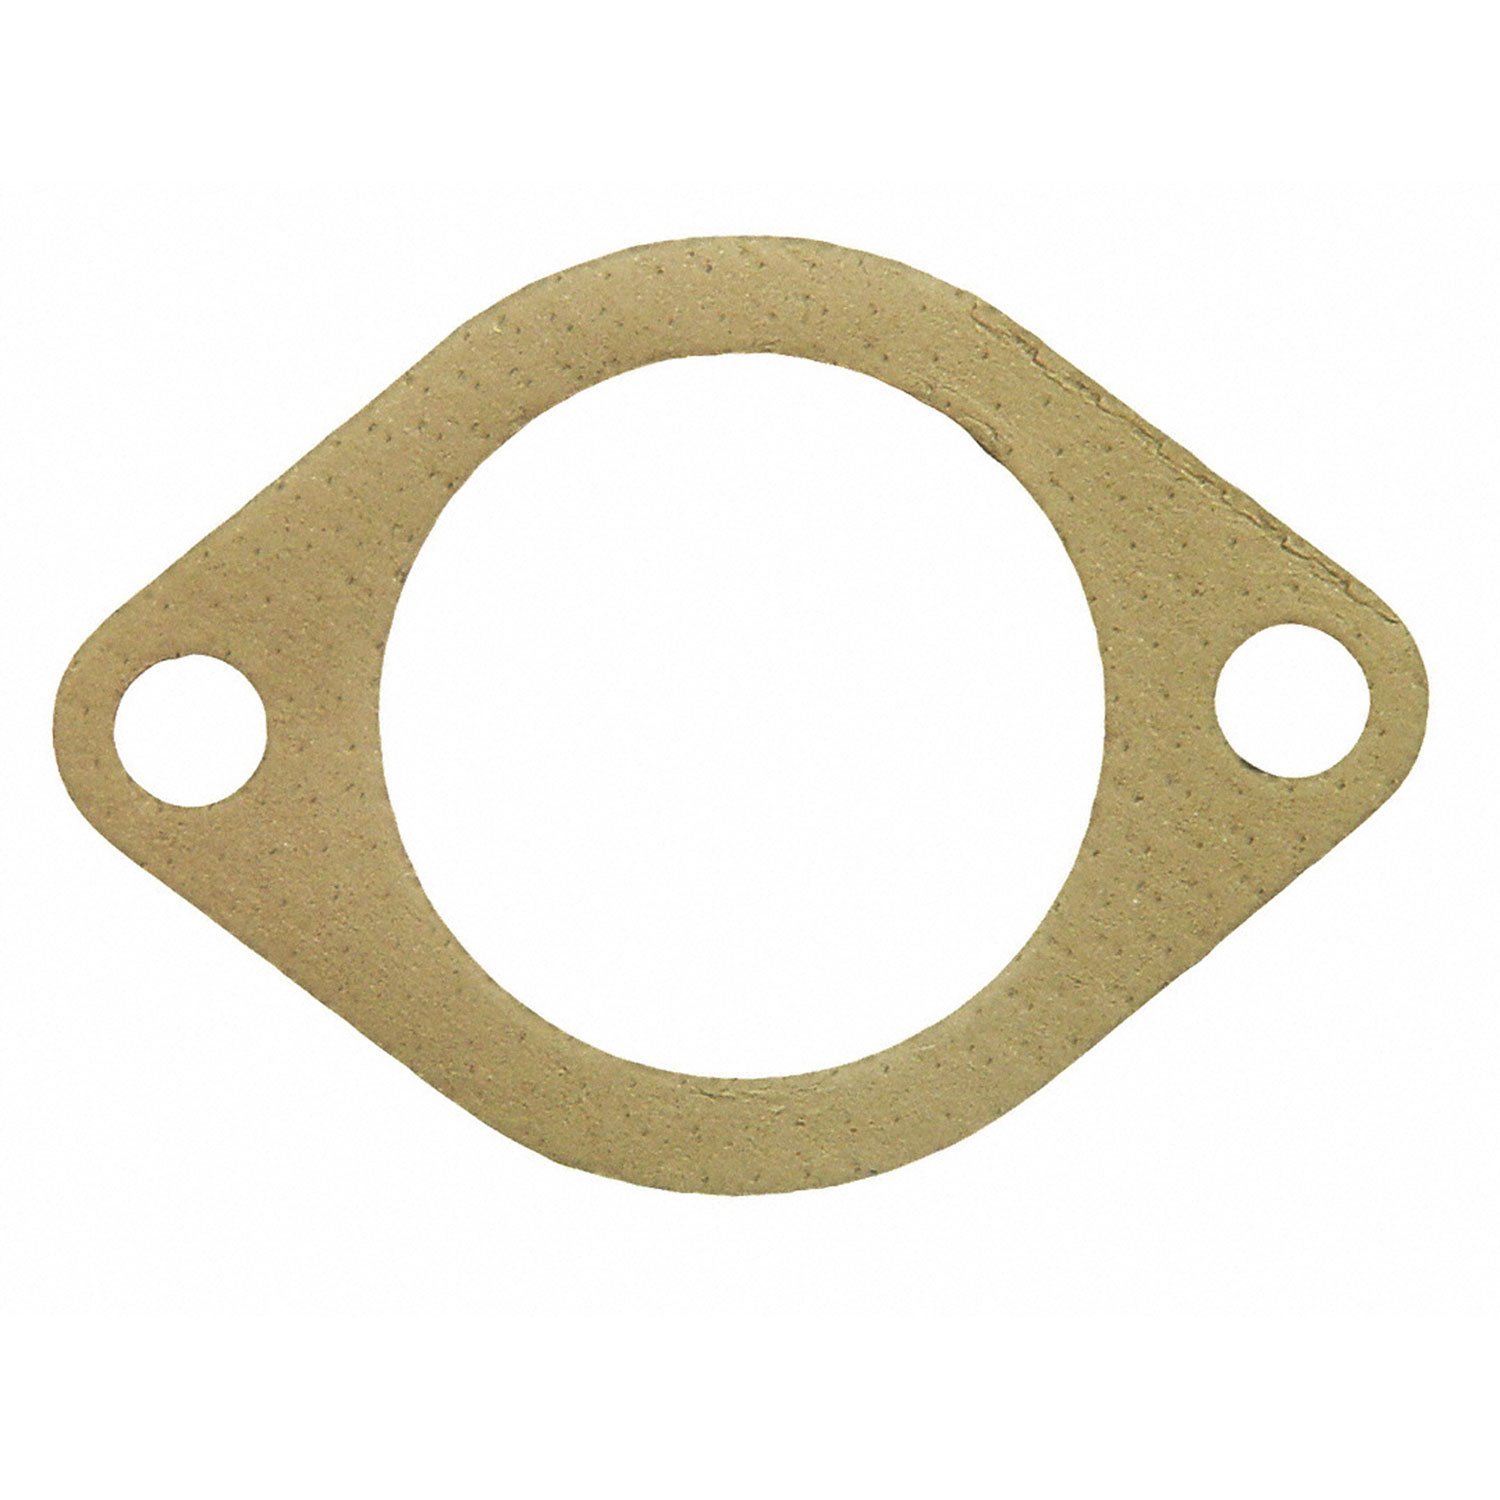 EXHAUST PIPE GASKET; 1955-1949 GM V8 331CI 5.4L